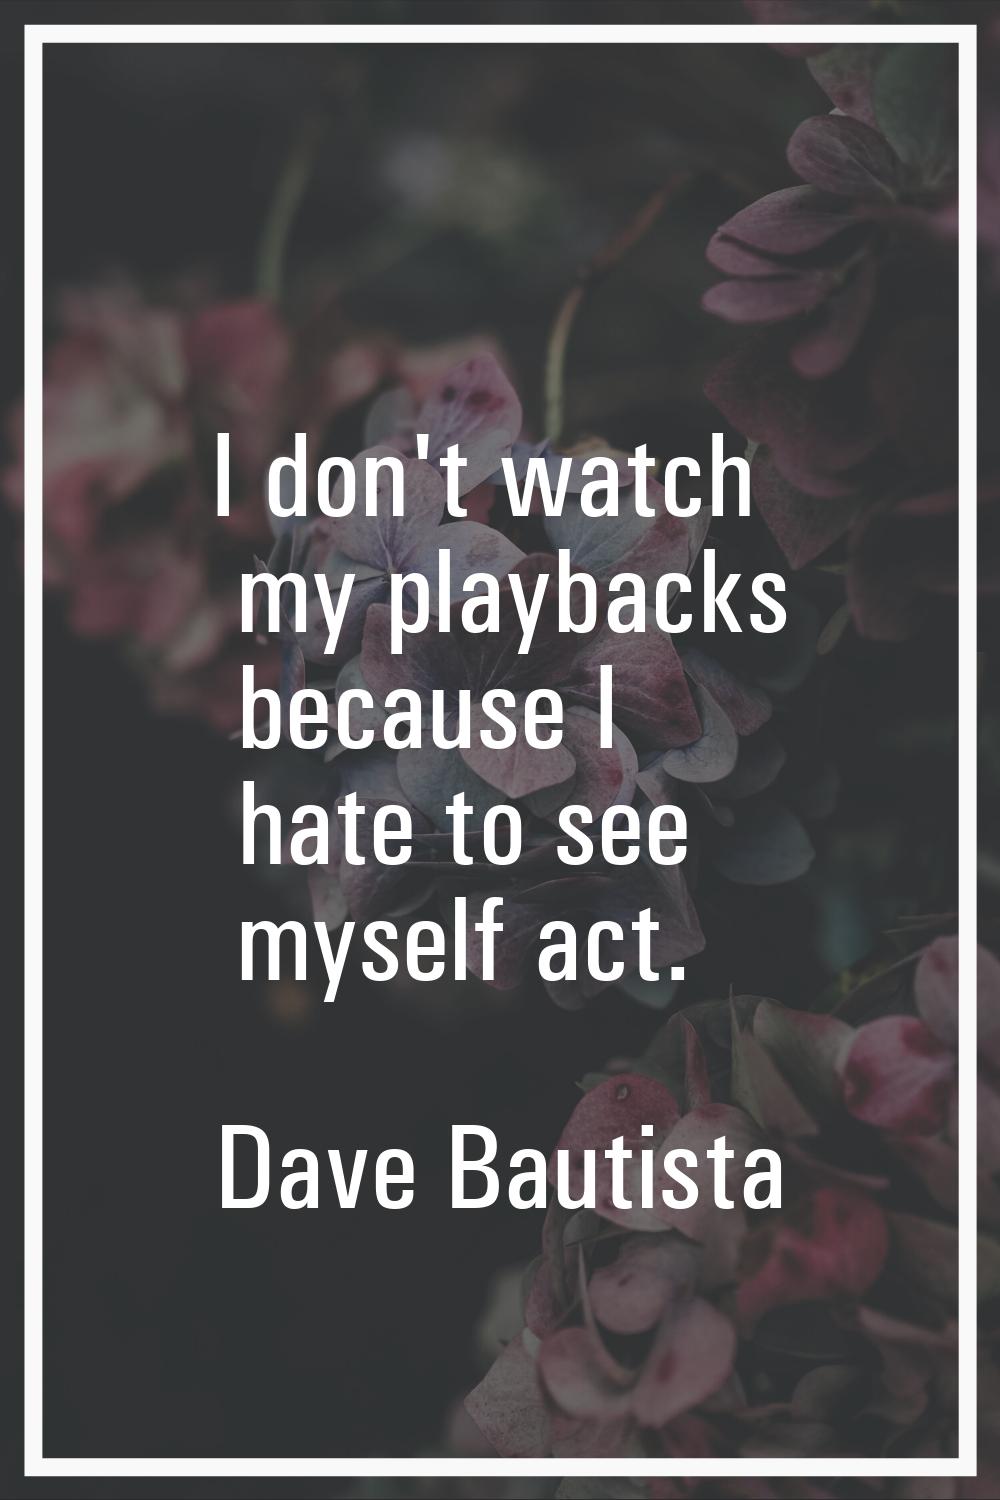 I don't watch my playbacks because I hate to see myself act.